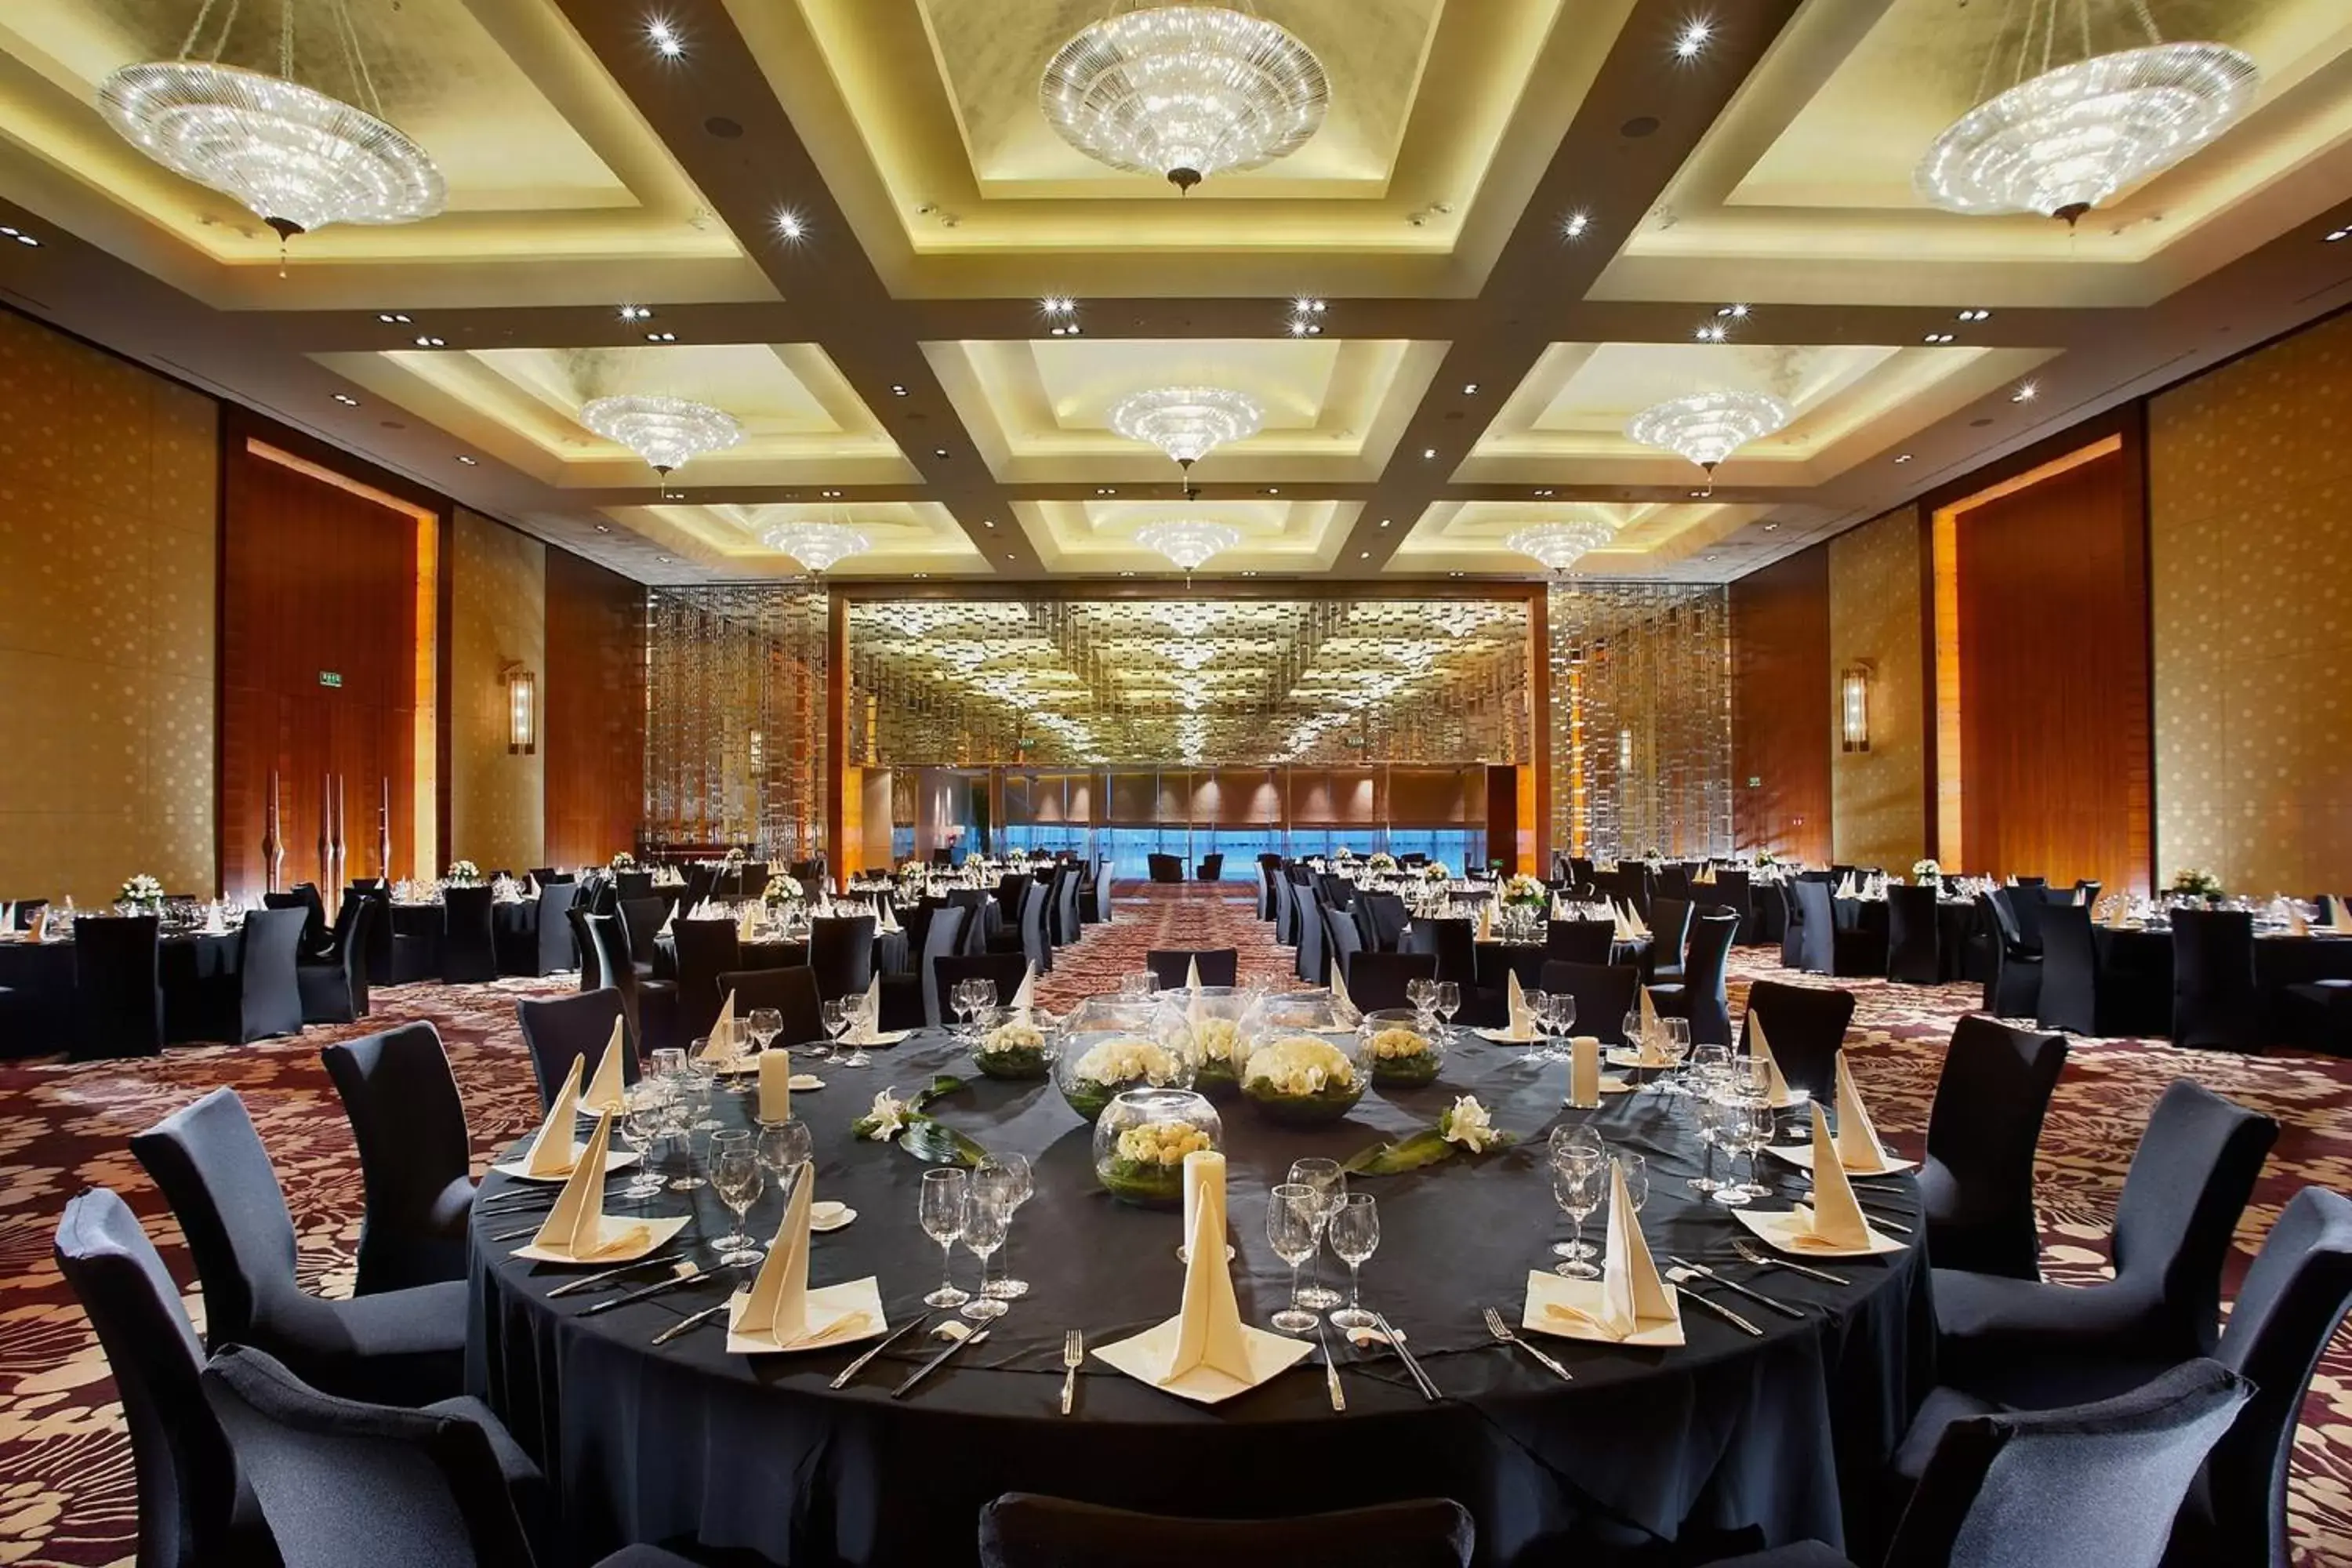 Meeting/conference room, Banquet Facilities in Renaissance Chengdu Hotel